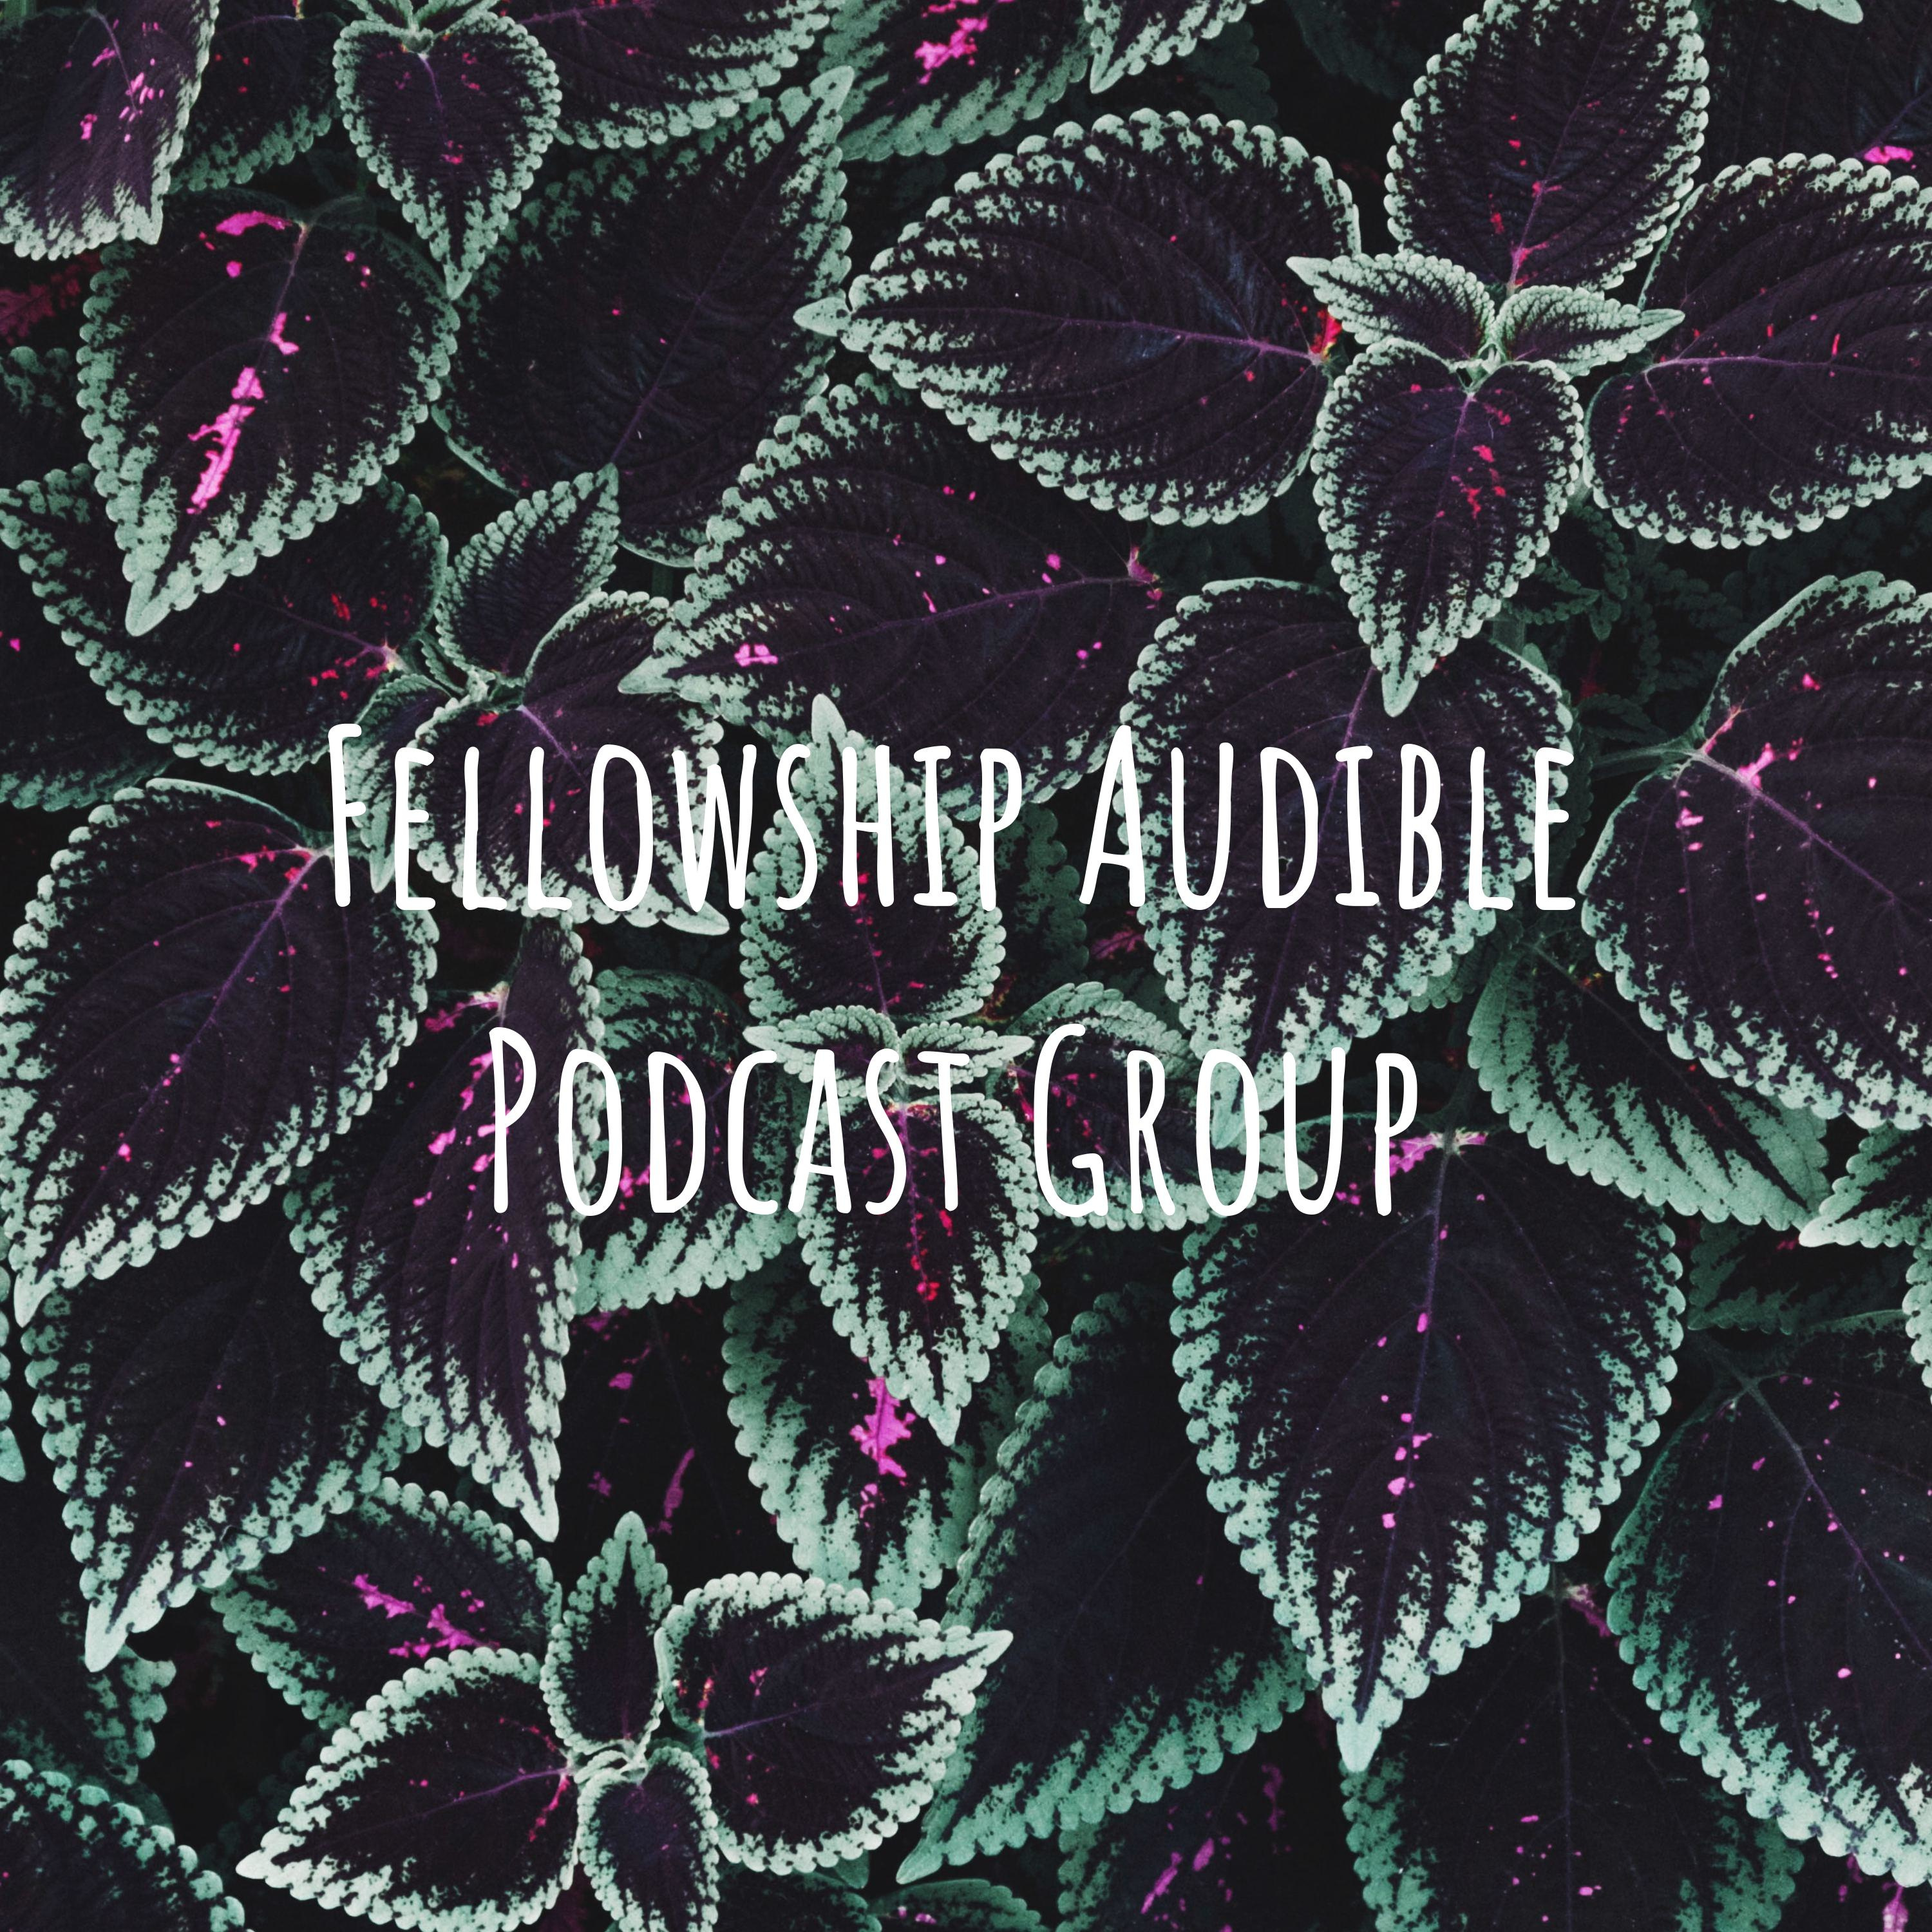 Fellowship Audio Podcast 26APR19 | Movie news to wrap up the week